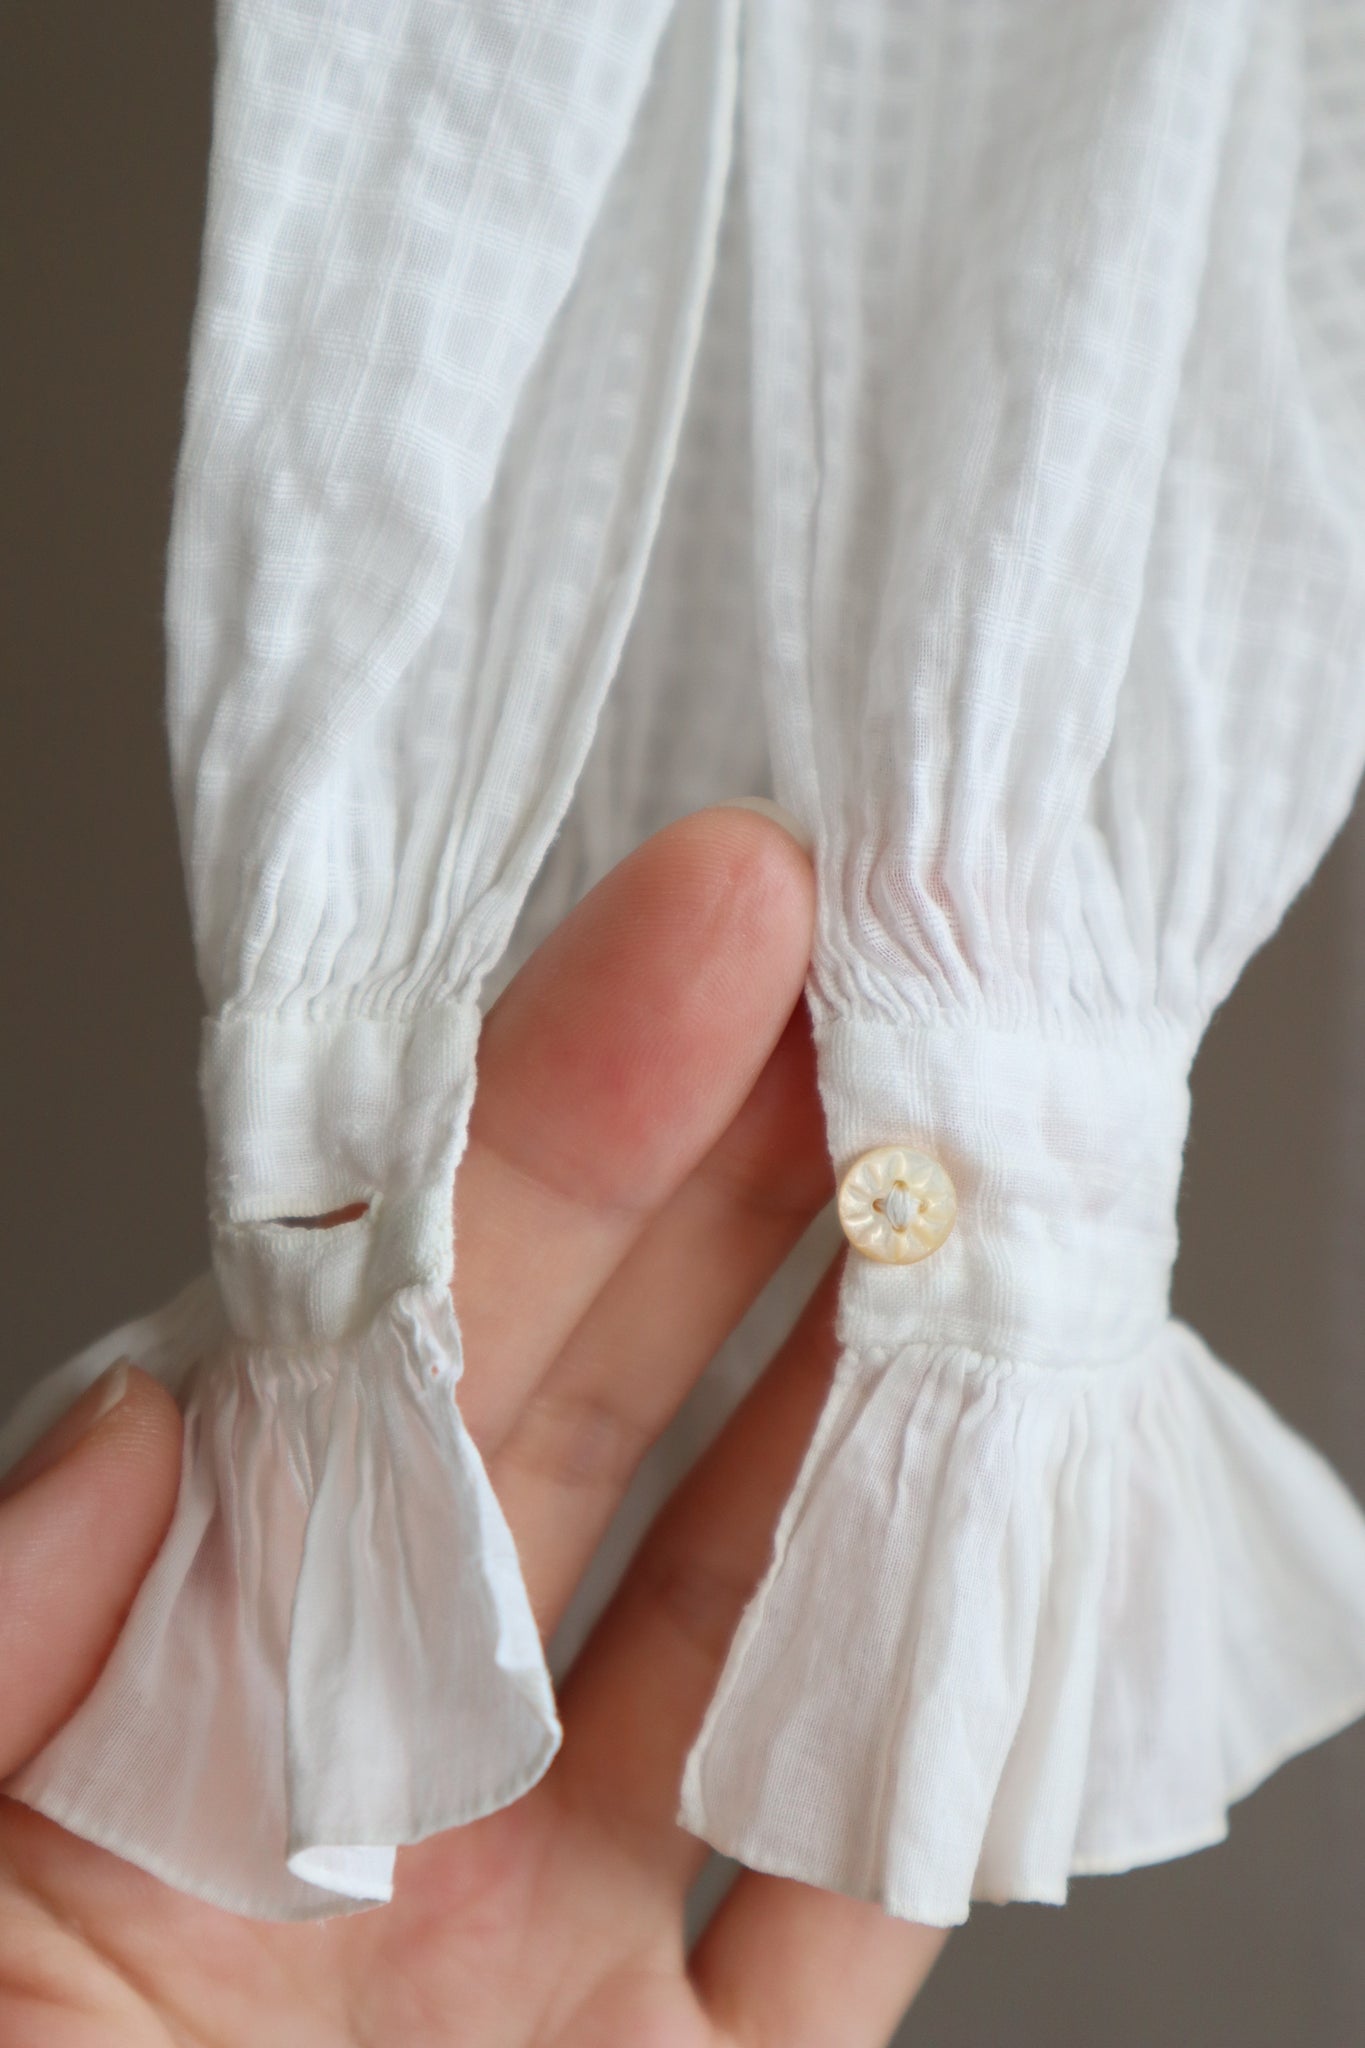 Late 1800s White Cotton Frilly Blouse